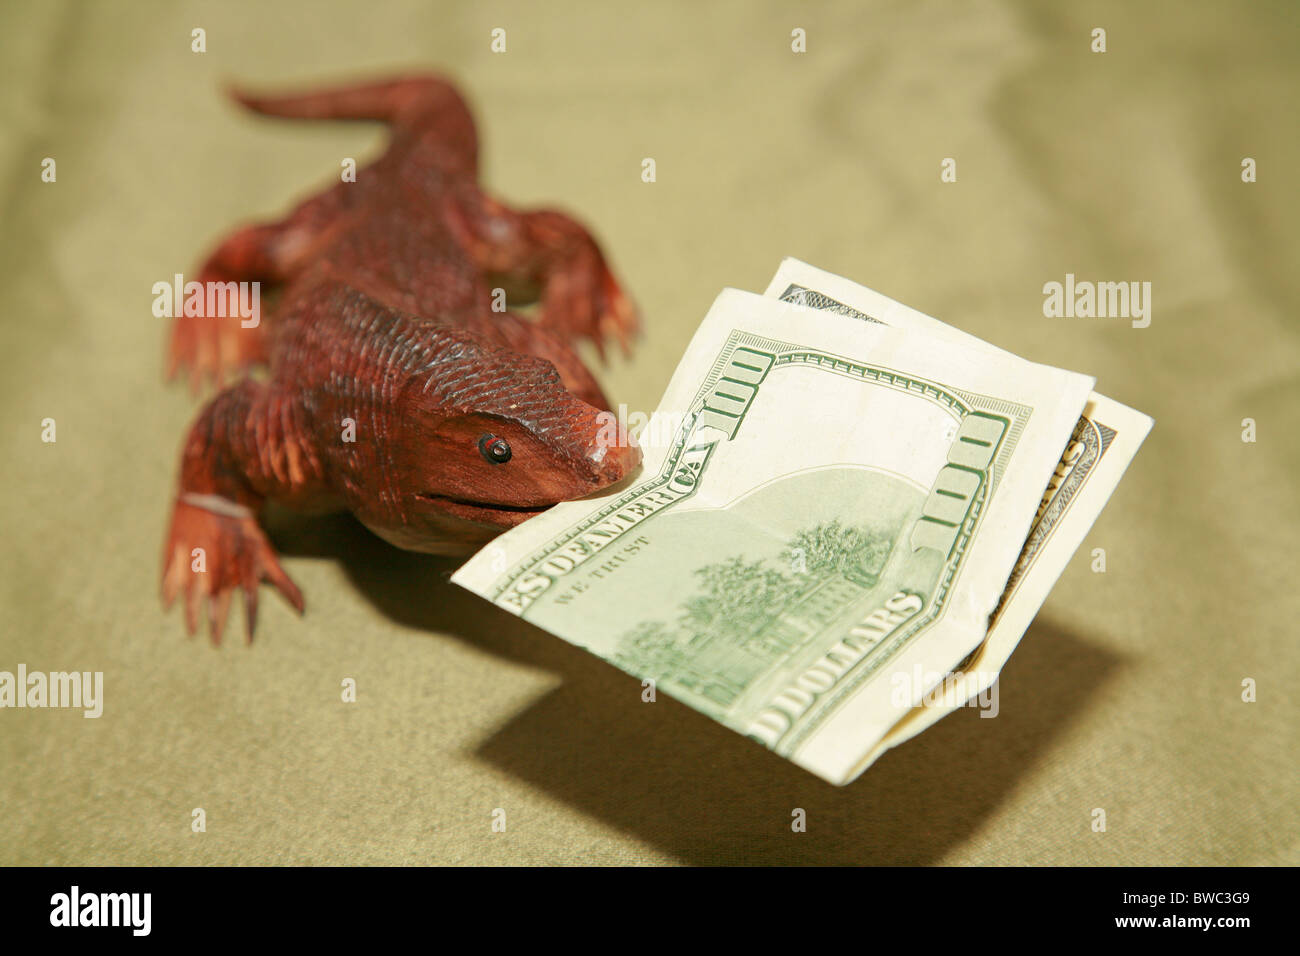 Wooden komodo dragon lizard souvenir carving biting US 100 dollar bill currency bank note in it's mouth Stock Photo